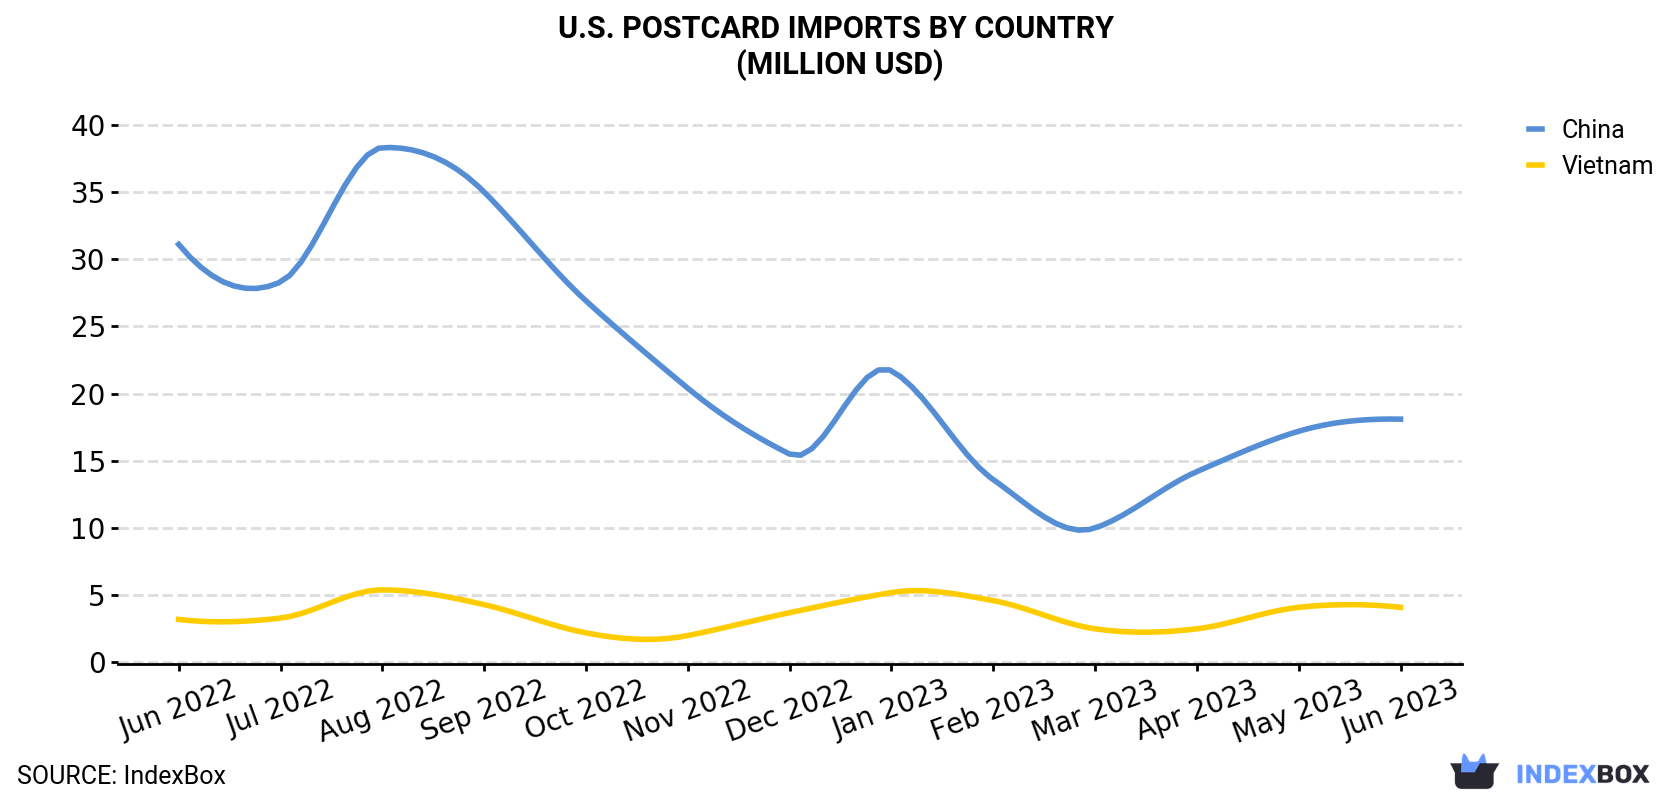 U.S. Postcard Imports By Country (Million USD)